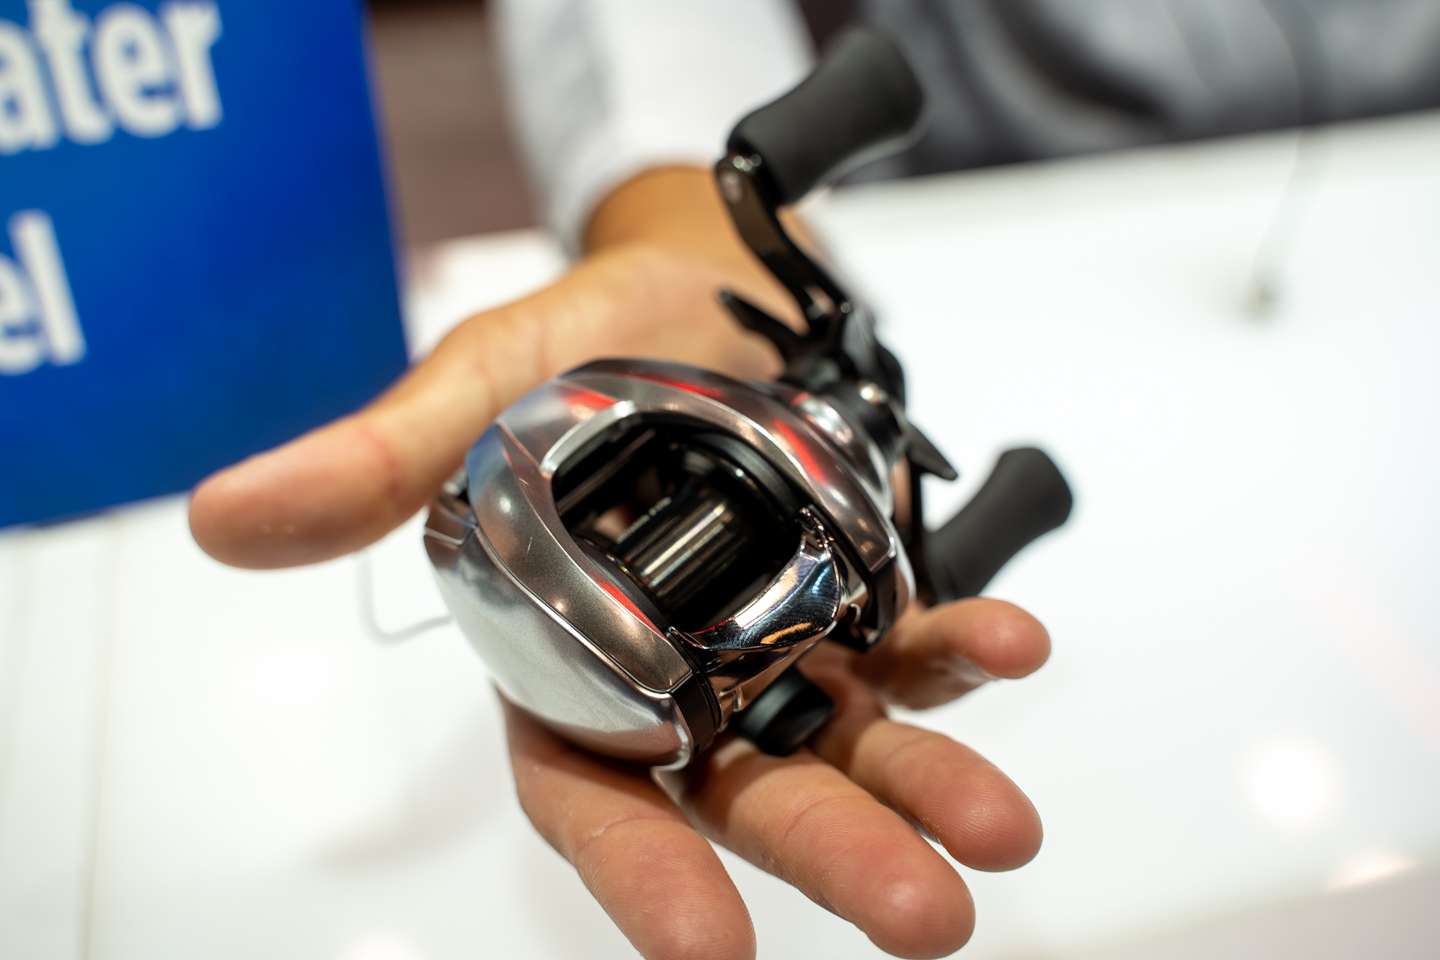 <b>Daiwa Zillion SV TW</b><br>
The Daiwa Zillion SV TW won the award for Best Freshwater Reel. Daiwa enhanced their already proven Zillion line of reels with this stylish and durable reel. 